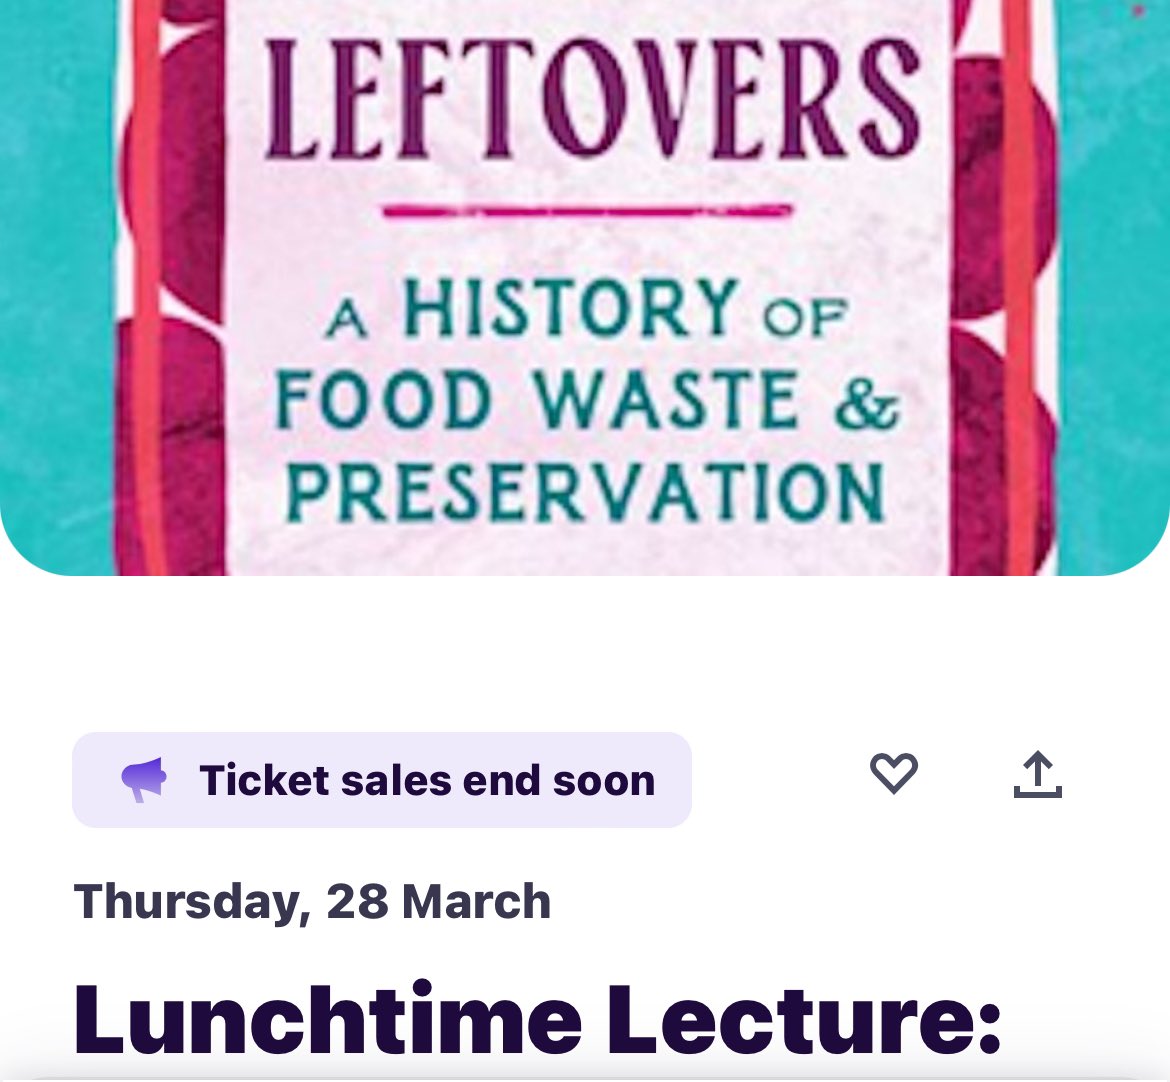 A reminder for #bristolfoodies that I’ll be speaking all about Leftovers: A History of Food Waste and Preservation this Thursday at Bristol Central Library! Come say hello, get your copy signed, and hear some fun stories from the book! Free tickets here: eventbrite.co.uk/e/lunchtime-le…